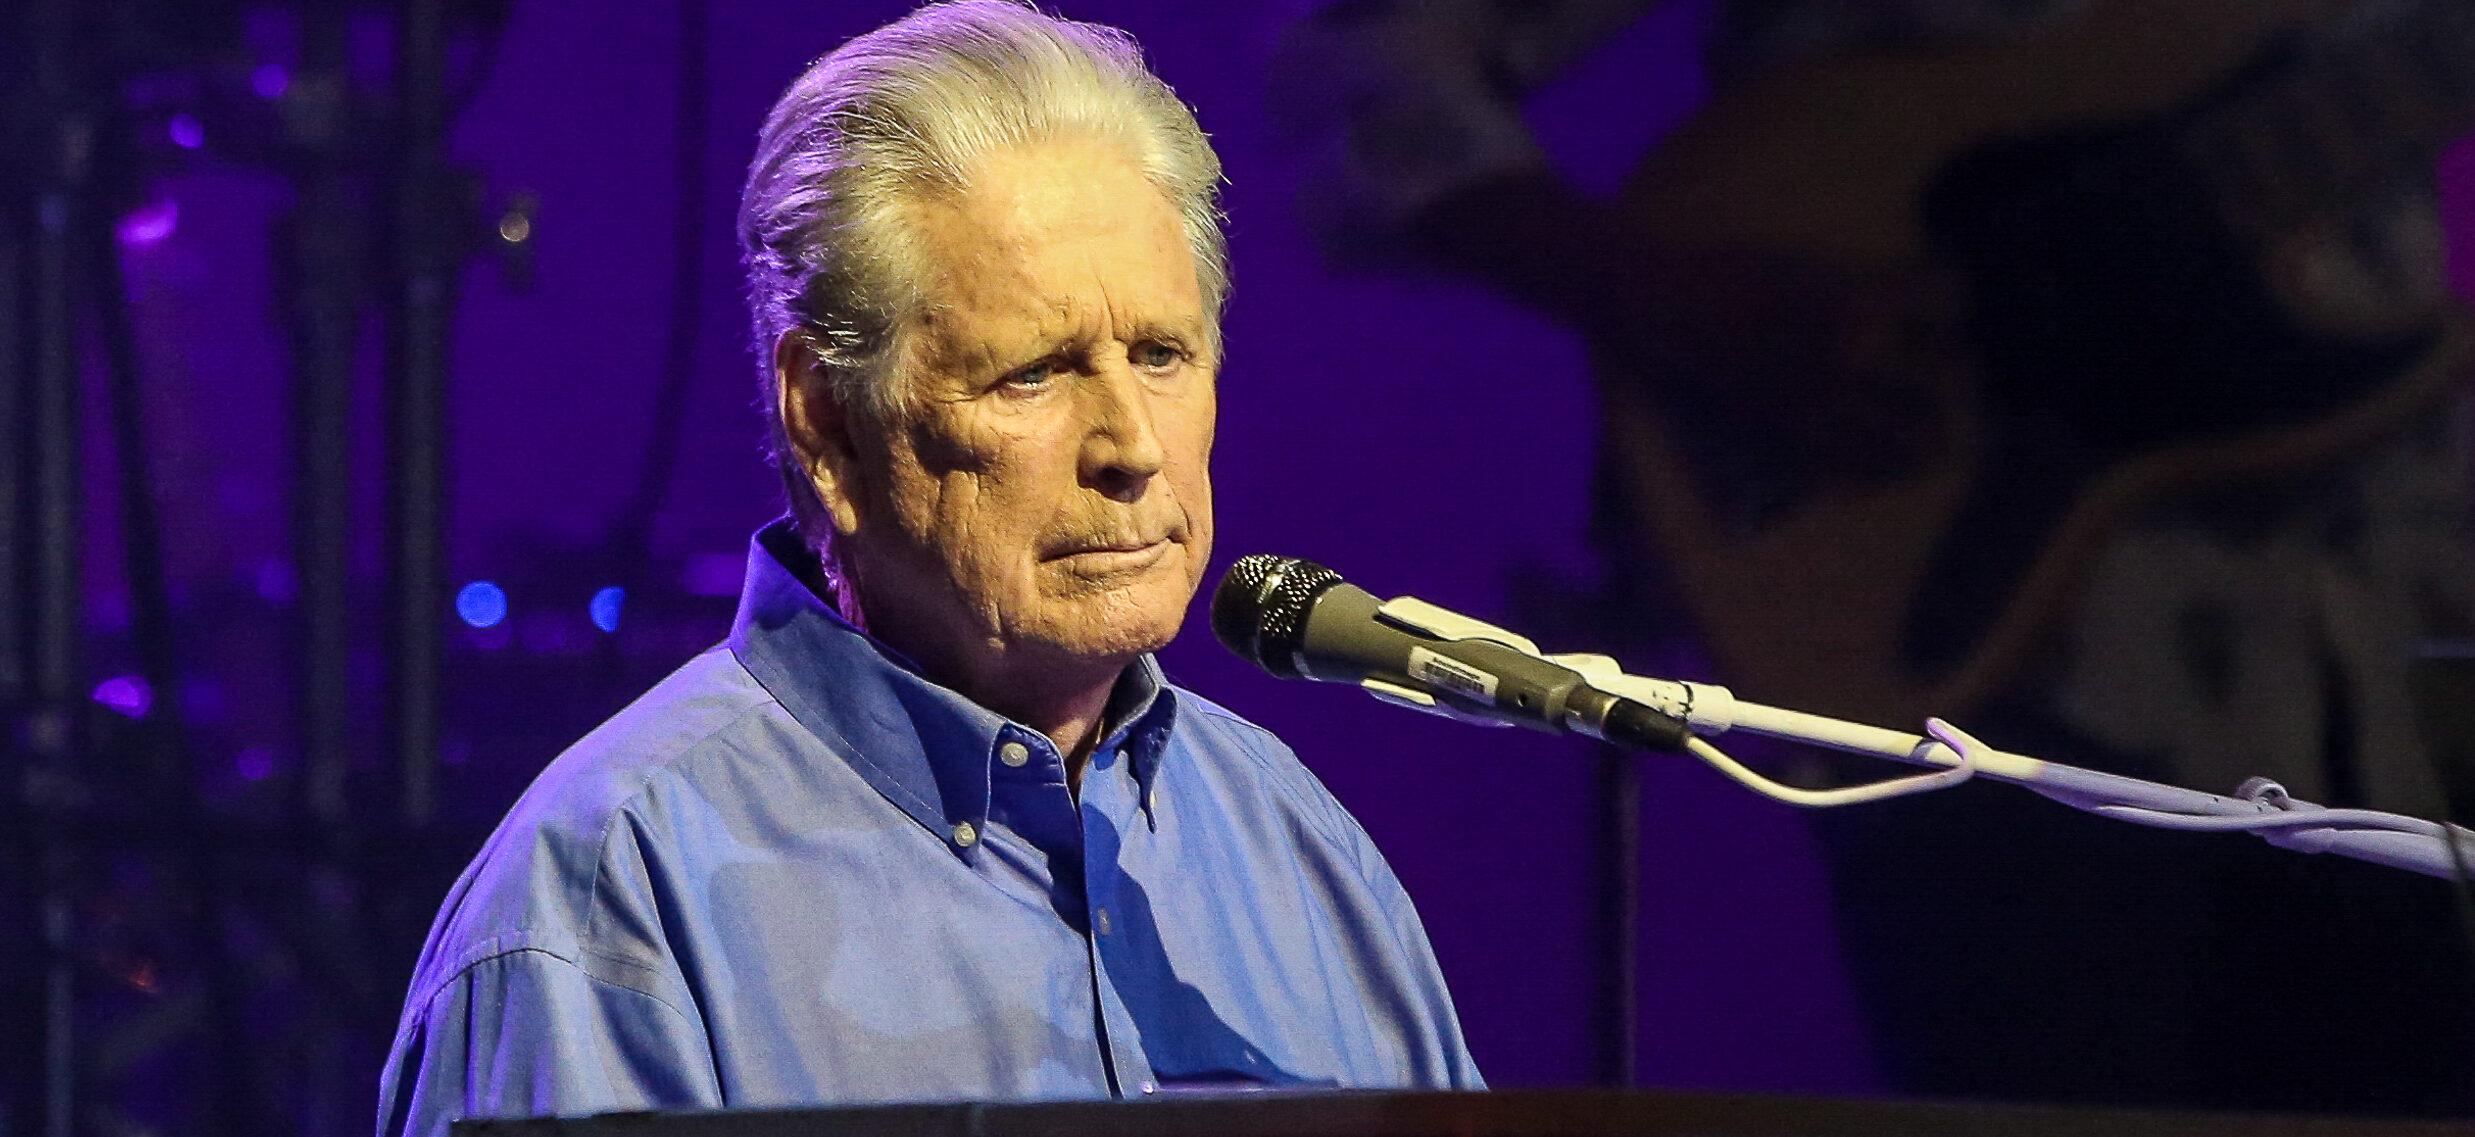 ‘Beach Boys’ Brian Wilson’s Family Files To Become His Conservator